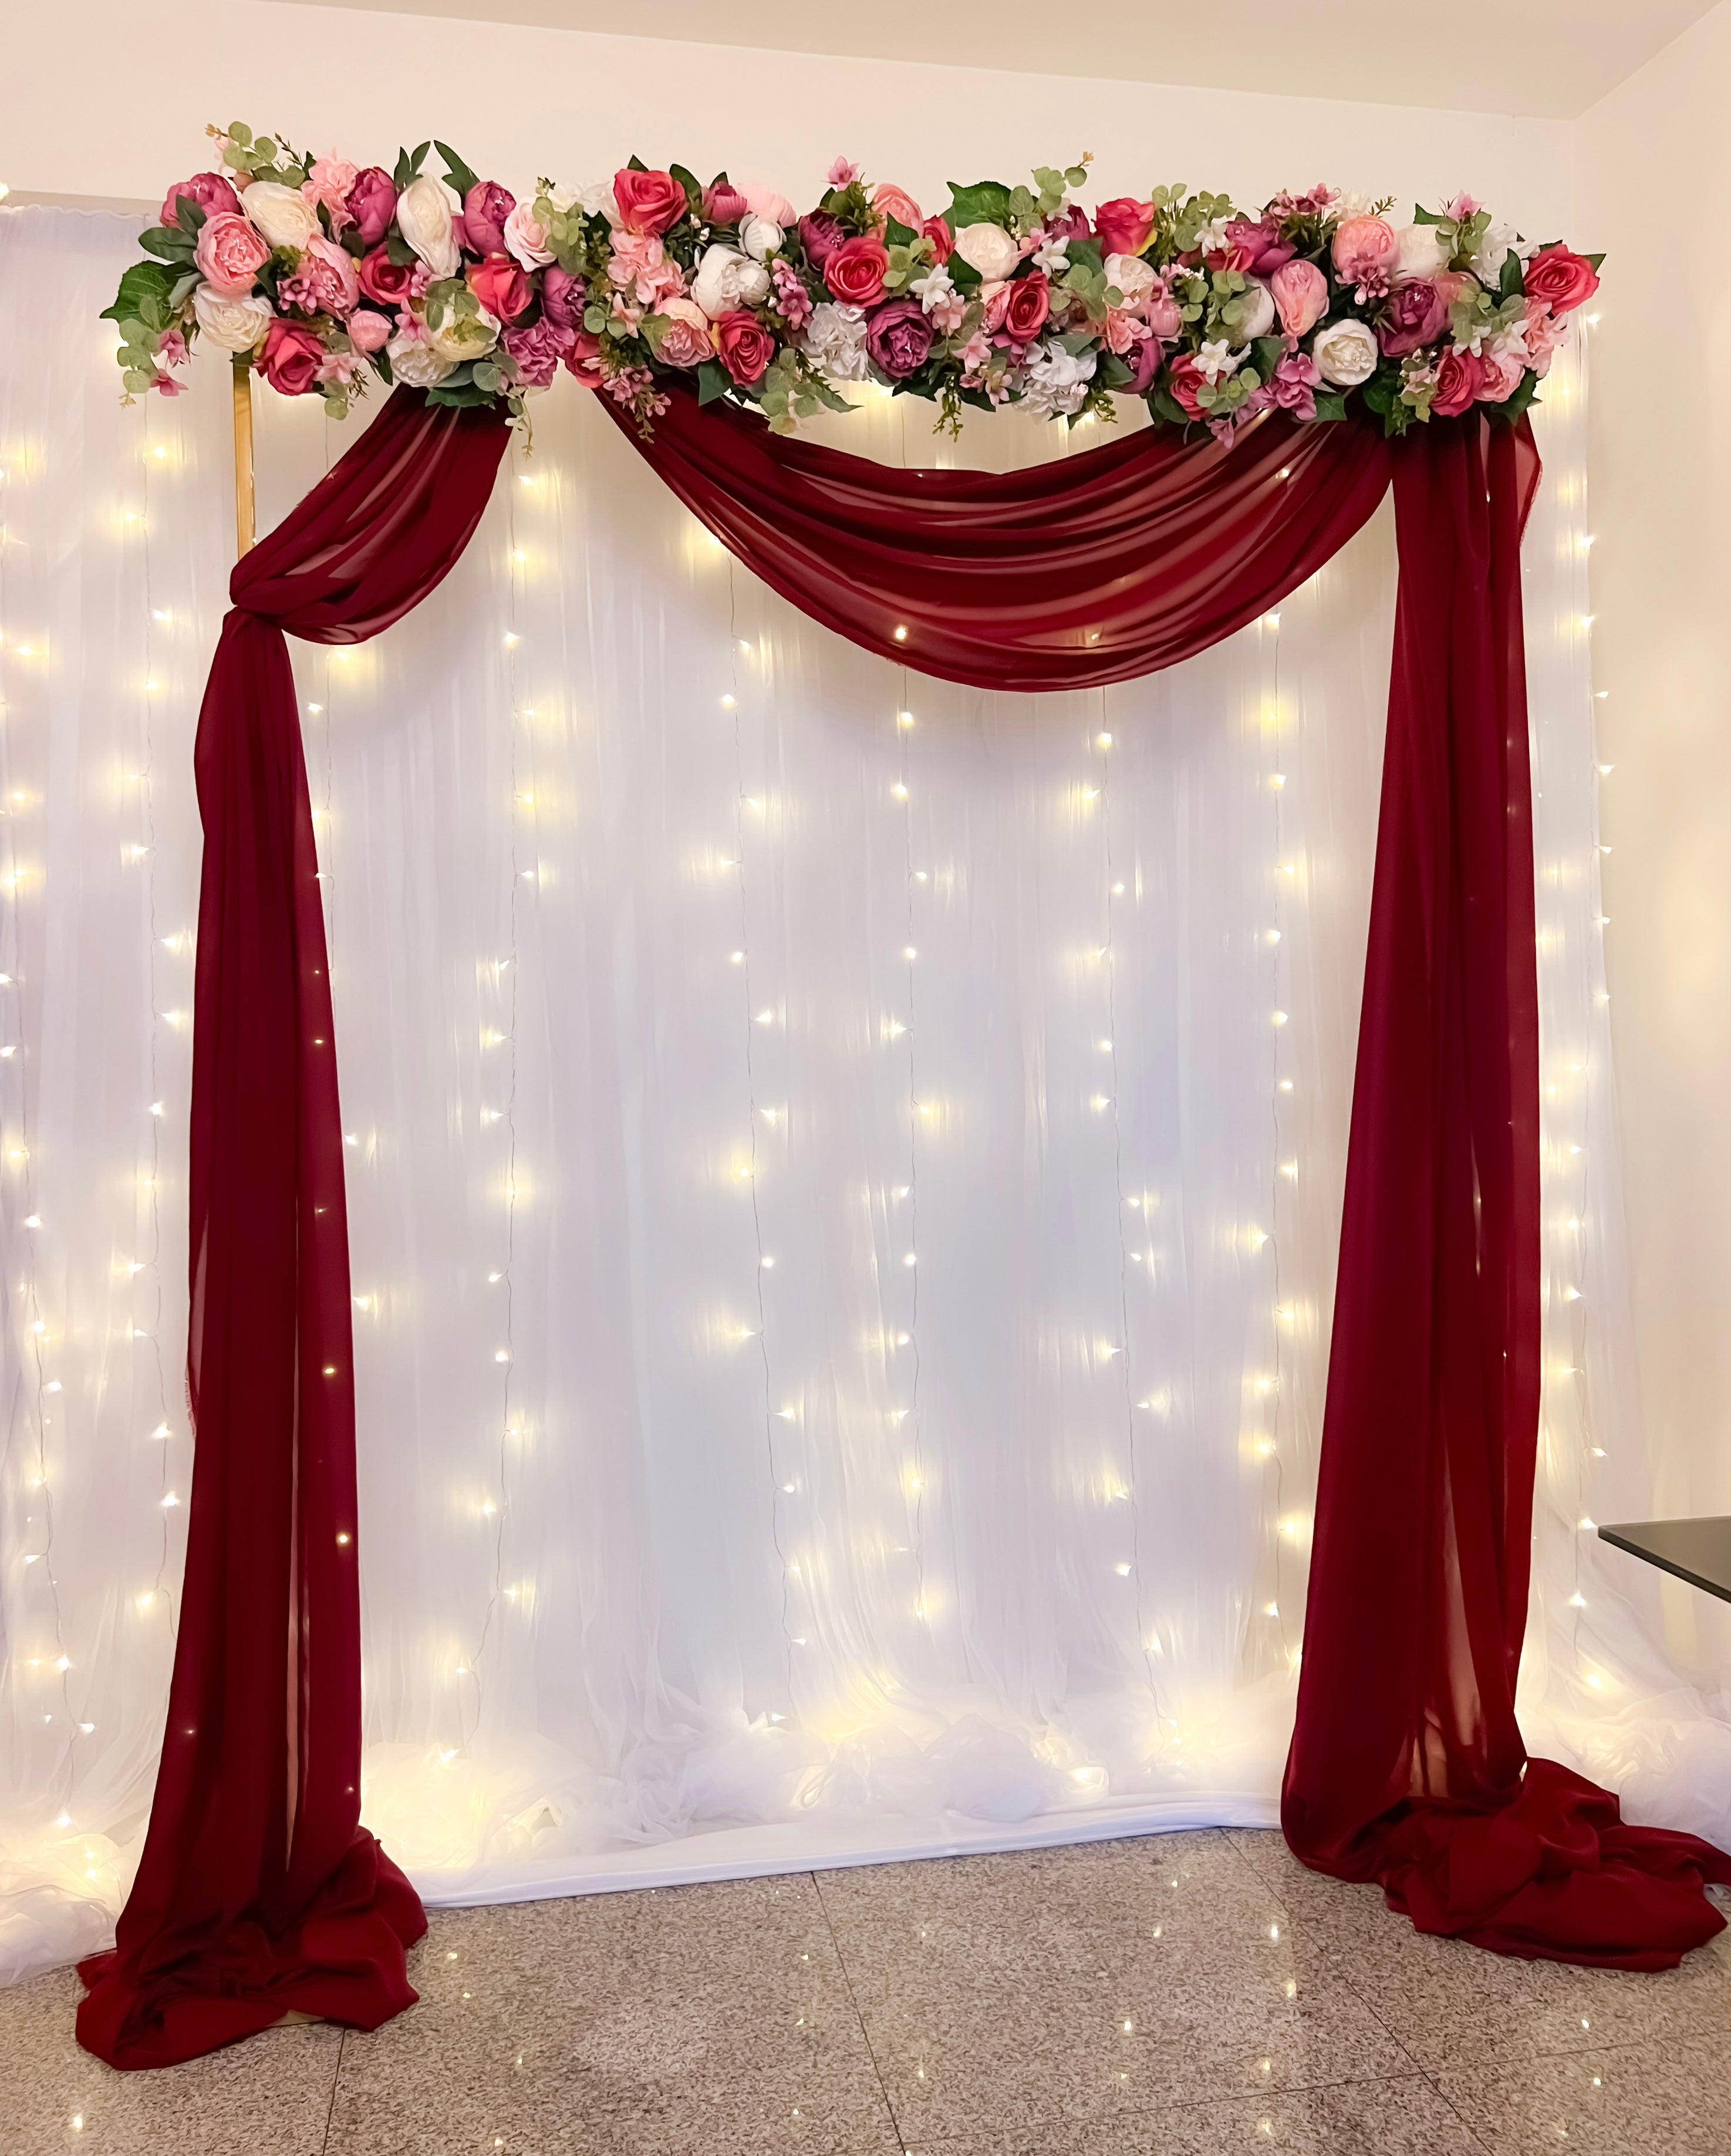 Fuschia Floral Arch with Fairy-light Backdrop